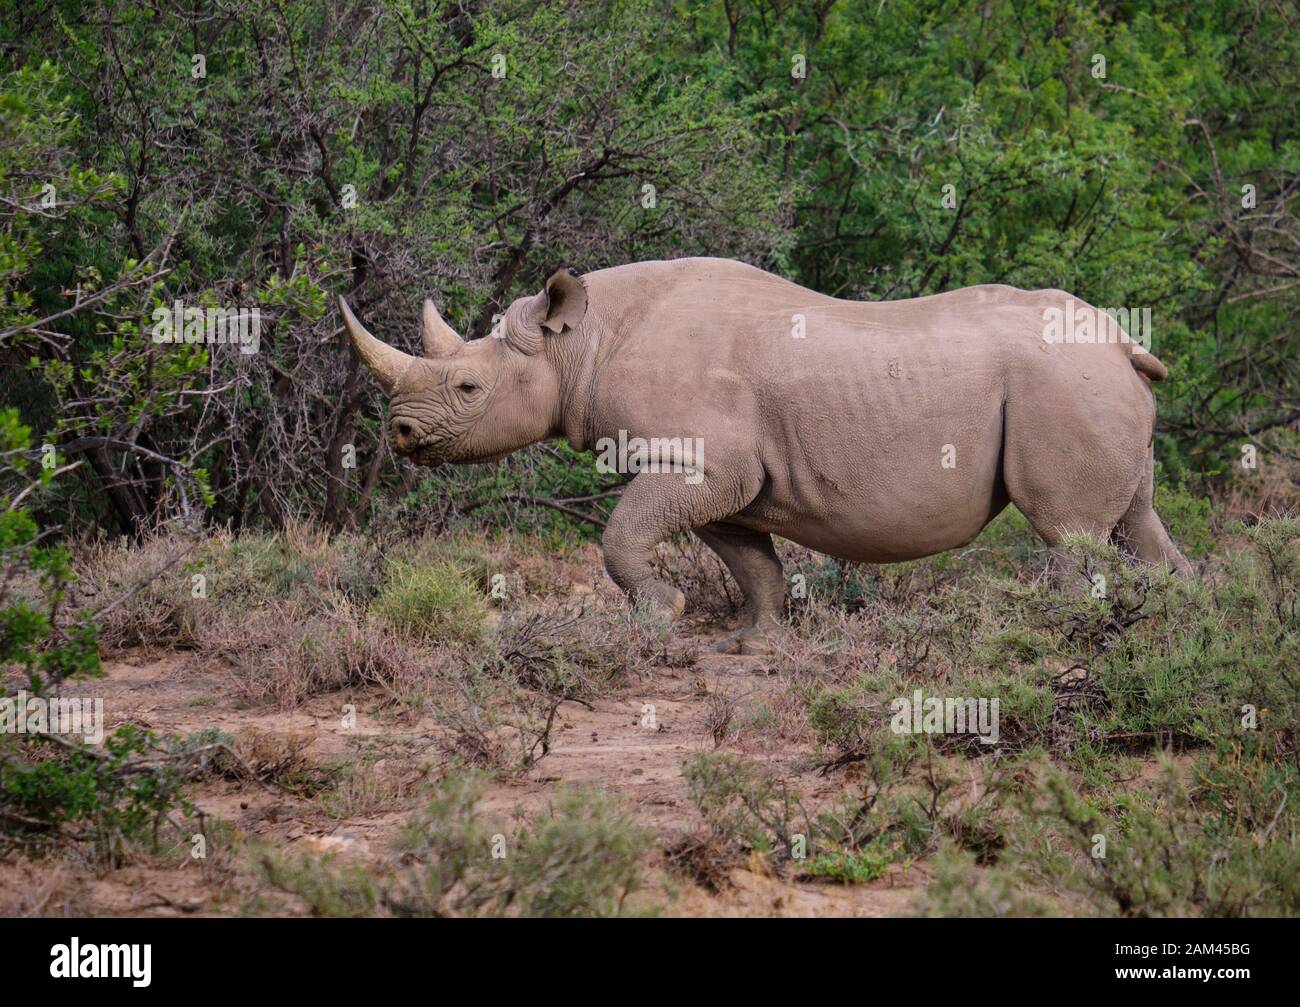 Lateral profile of a black rhinoceros (Diceros bicornis) in walking motion in dry arid landscape, with acacia bush background Stock Photo